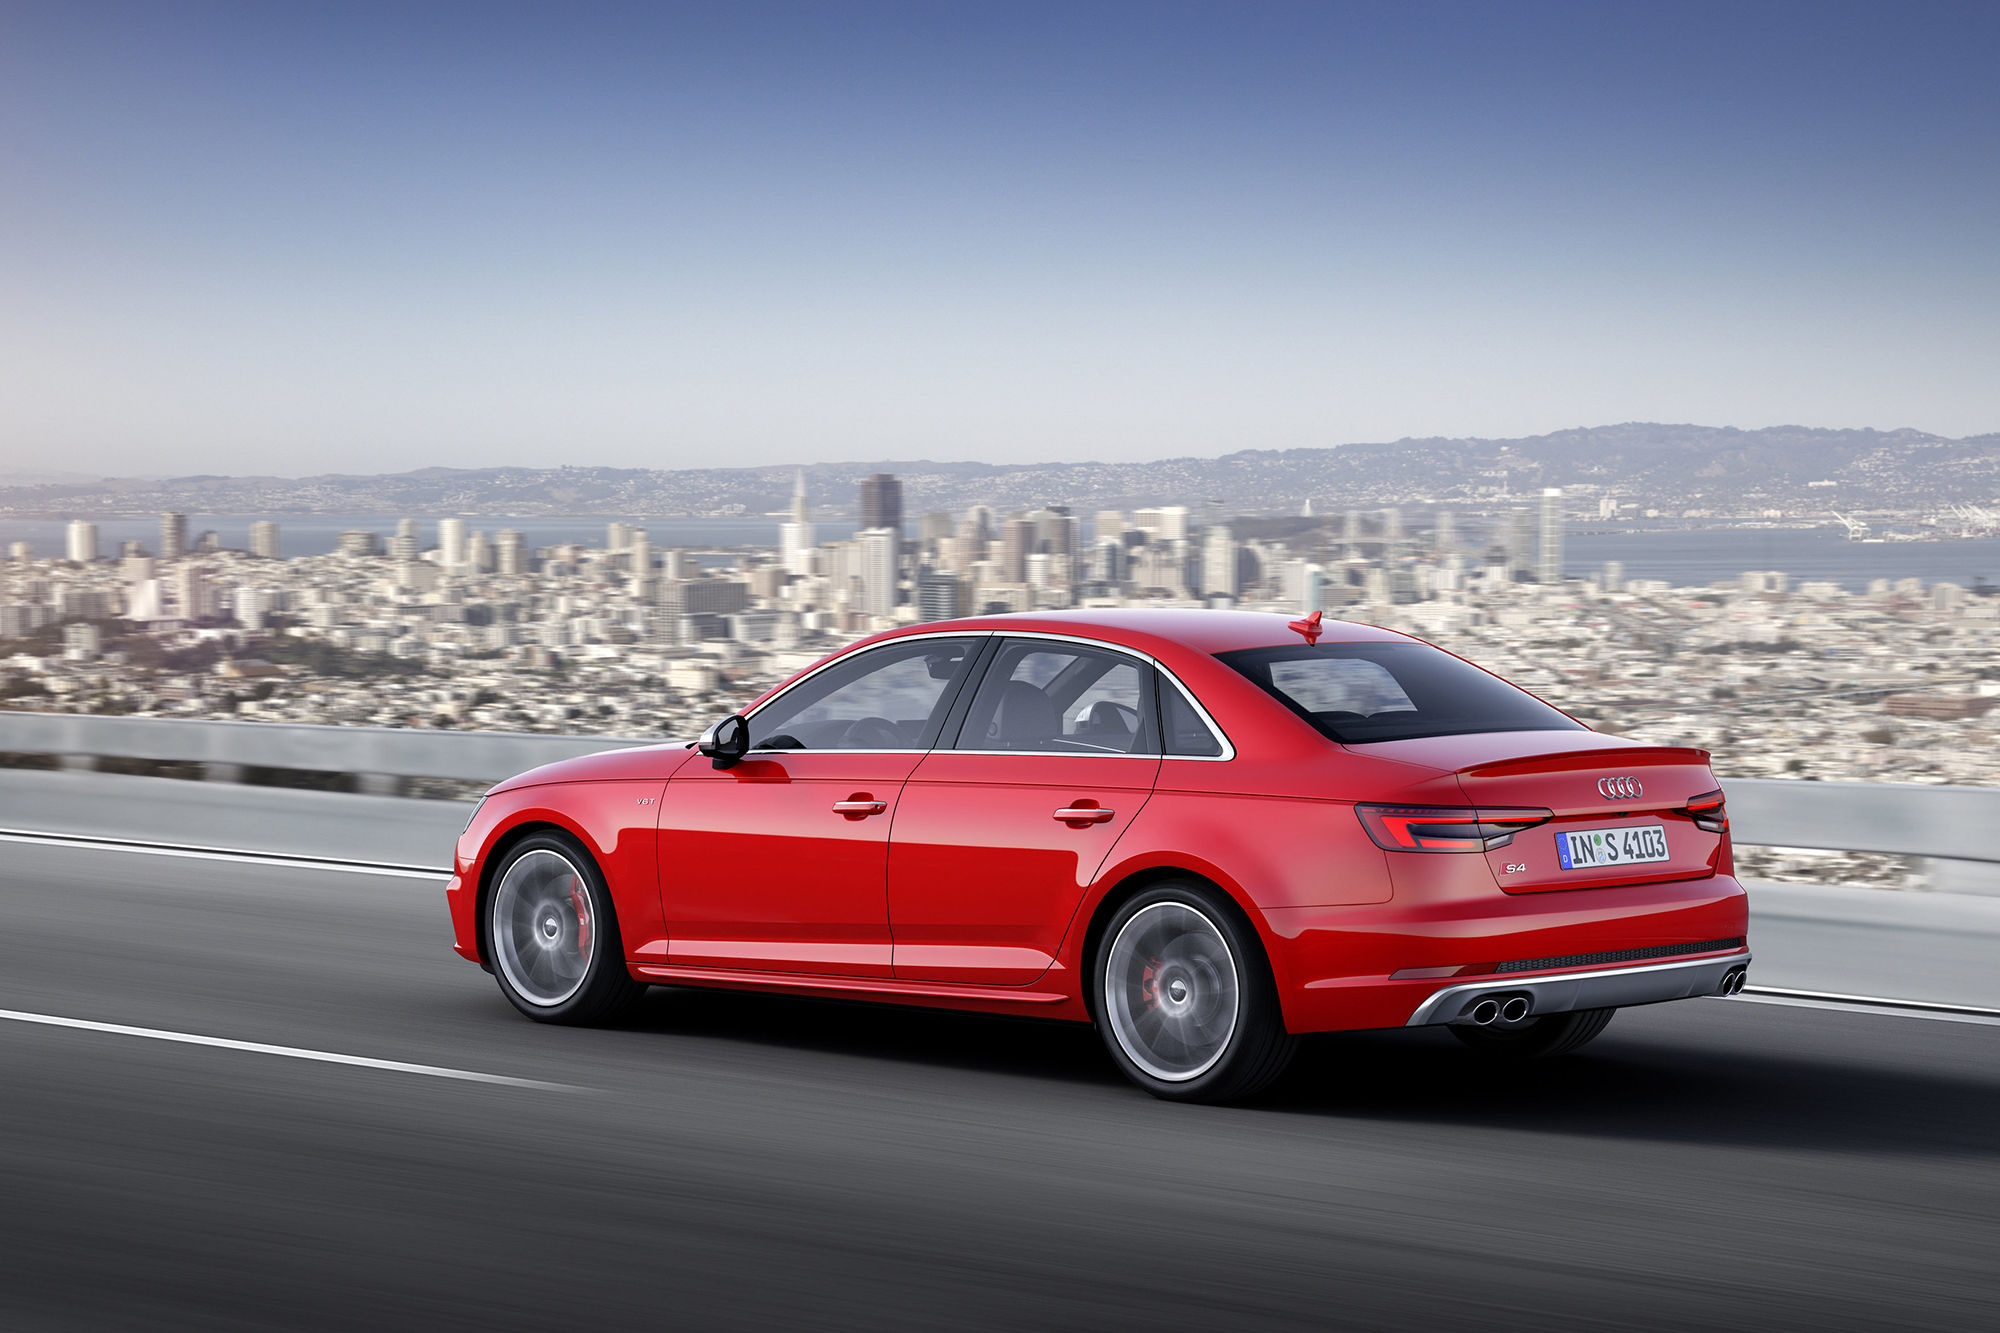 The Audi S4 is an all-rounded turbocharged sleeper you’ll really want